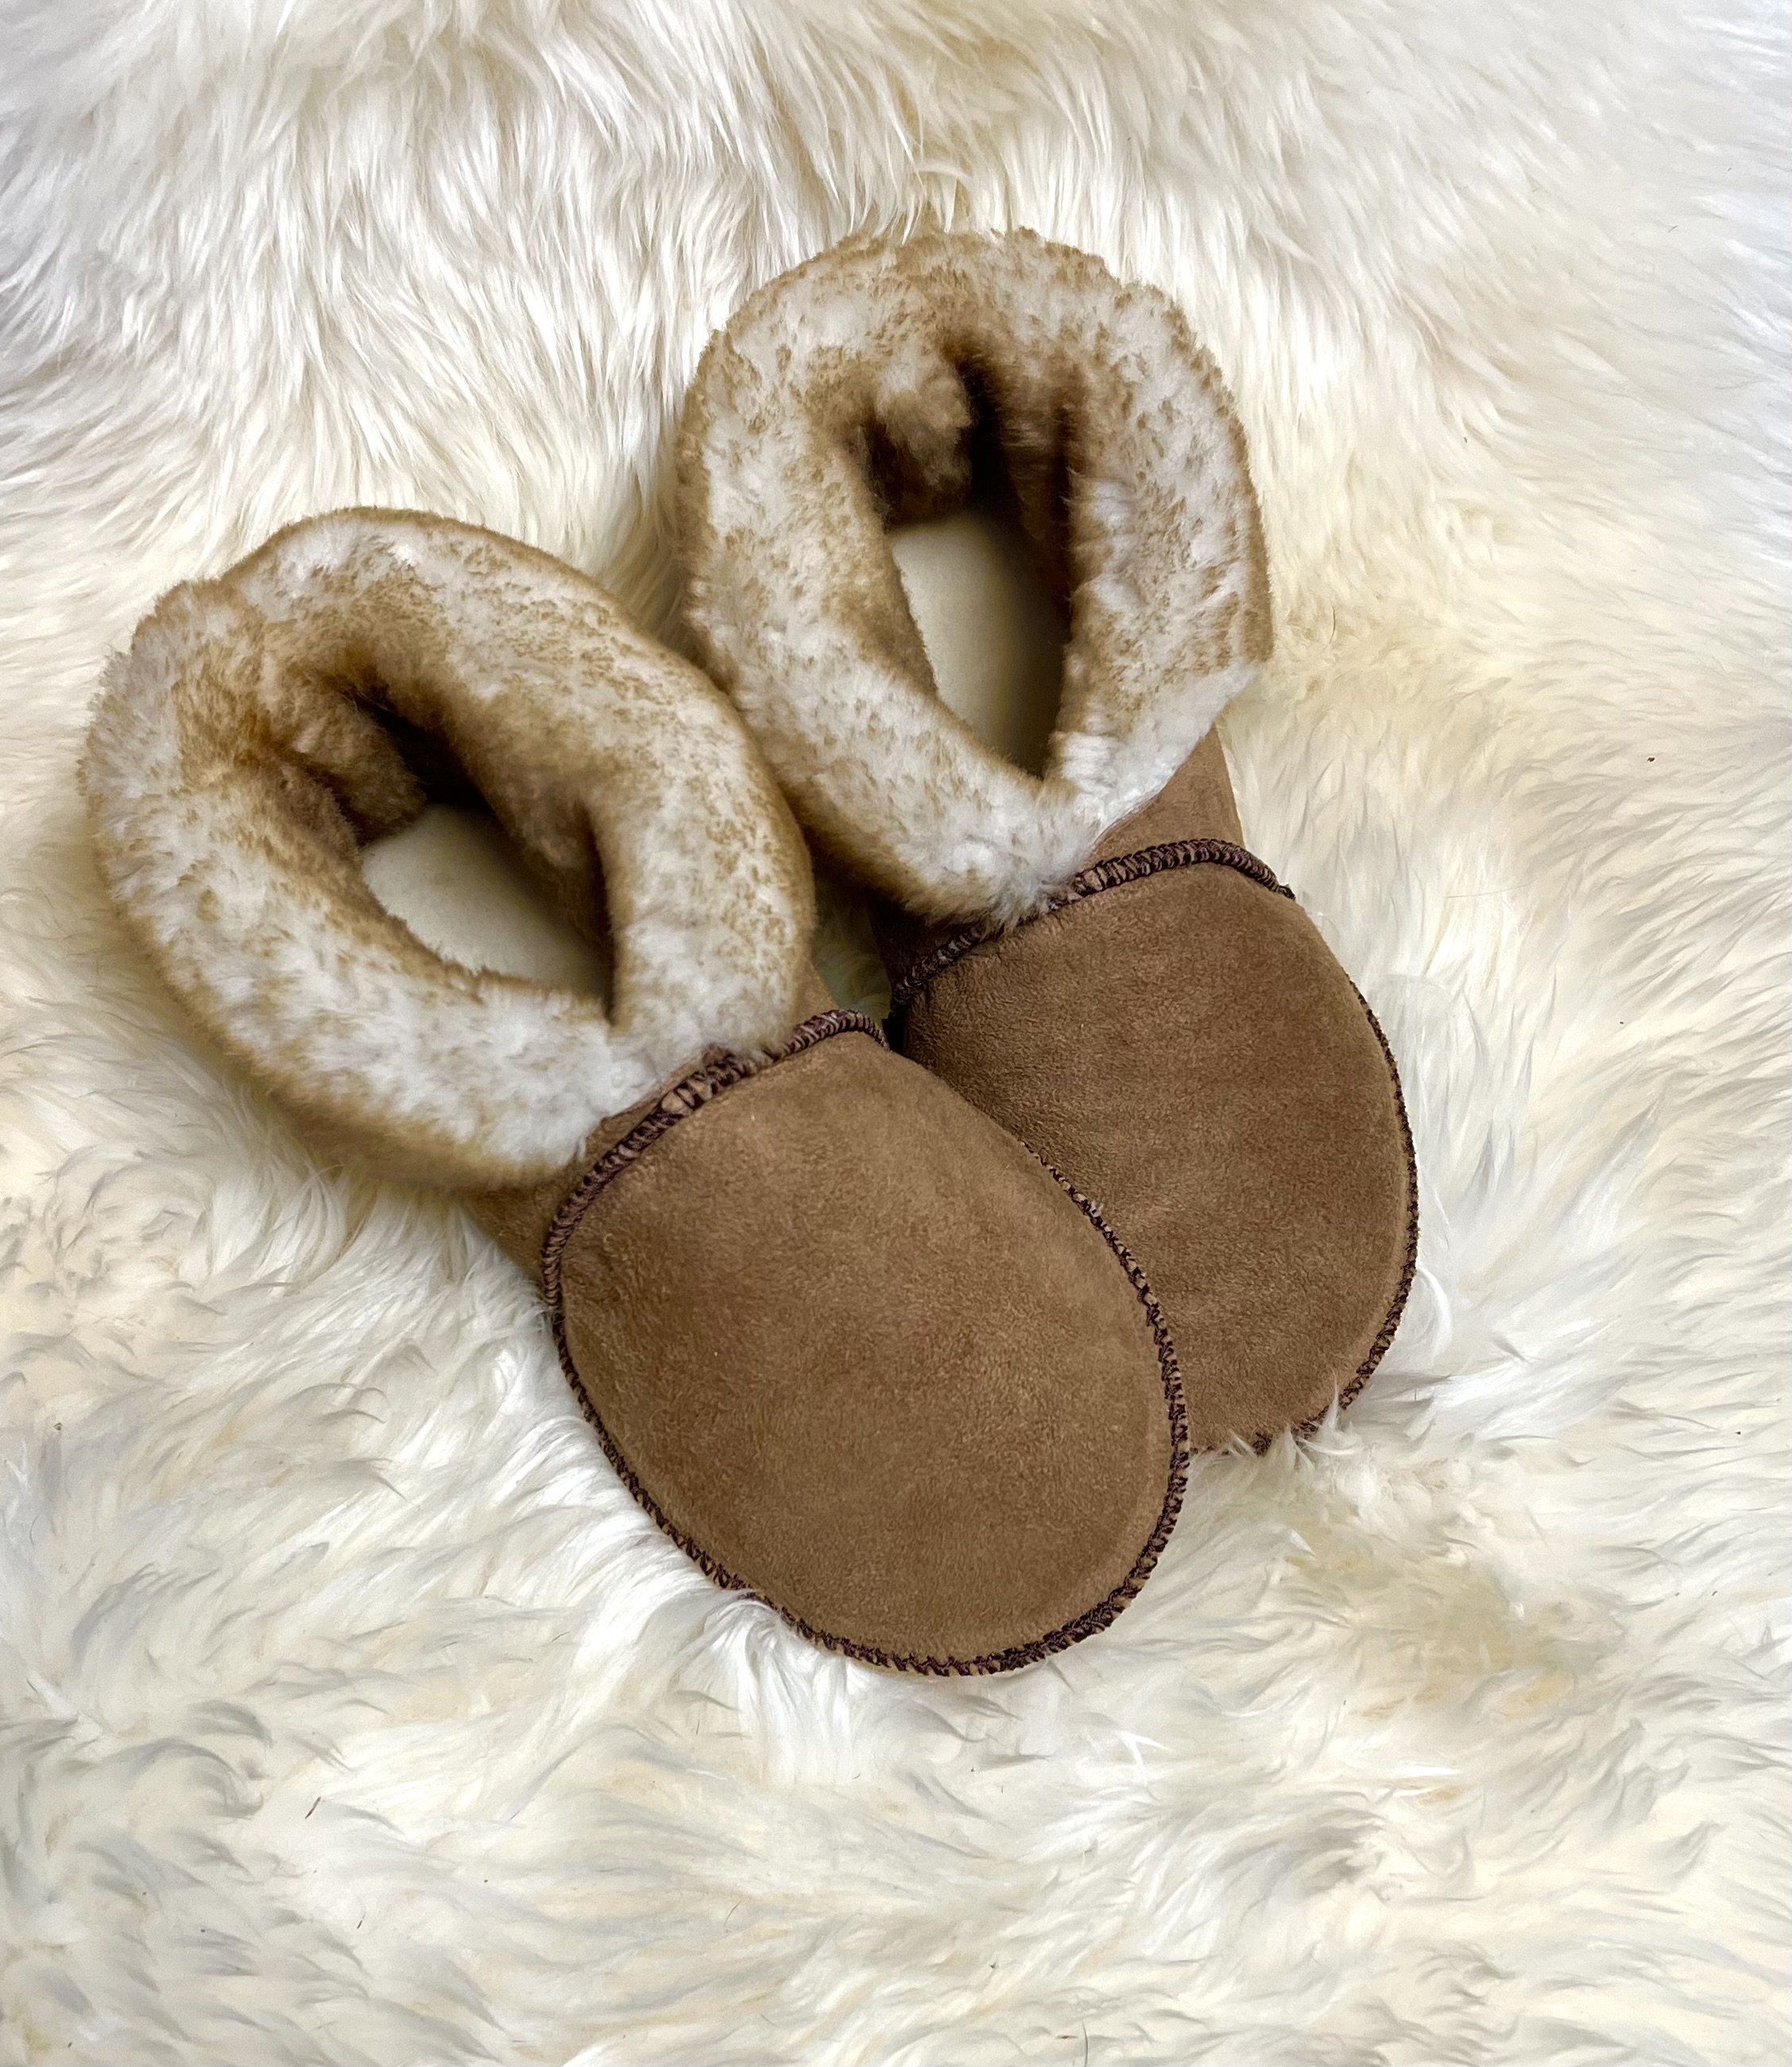 Possum Fur indoor/outdoor super-warm shoes from Kiwi Country Clothing